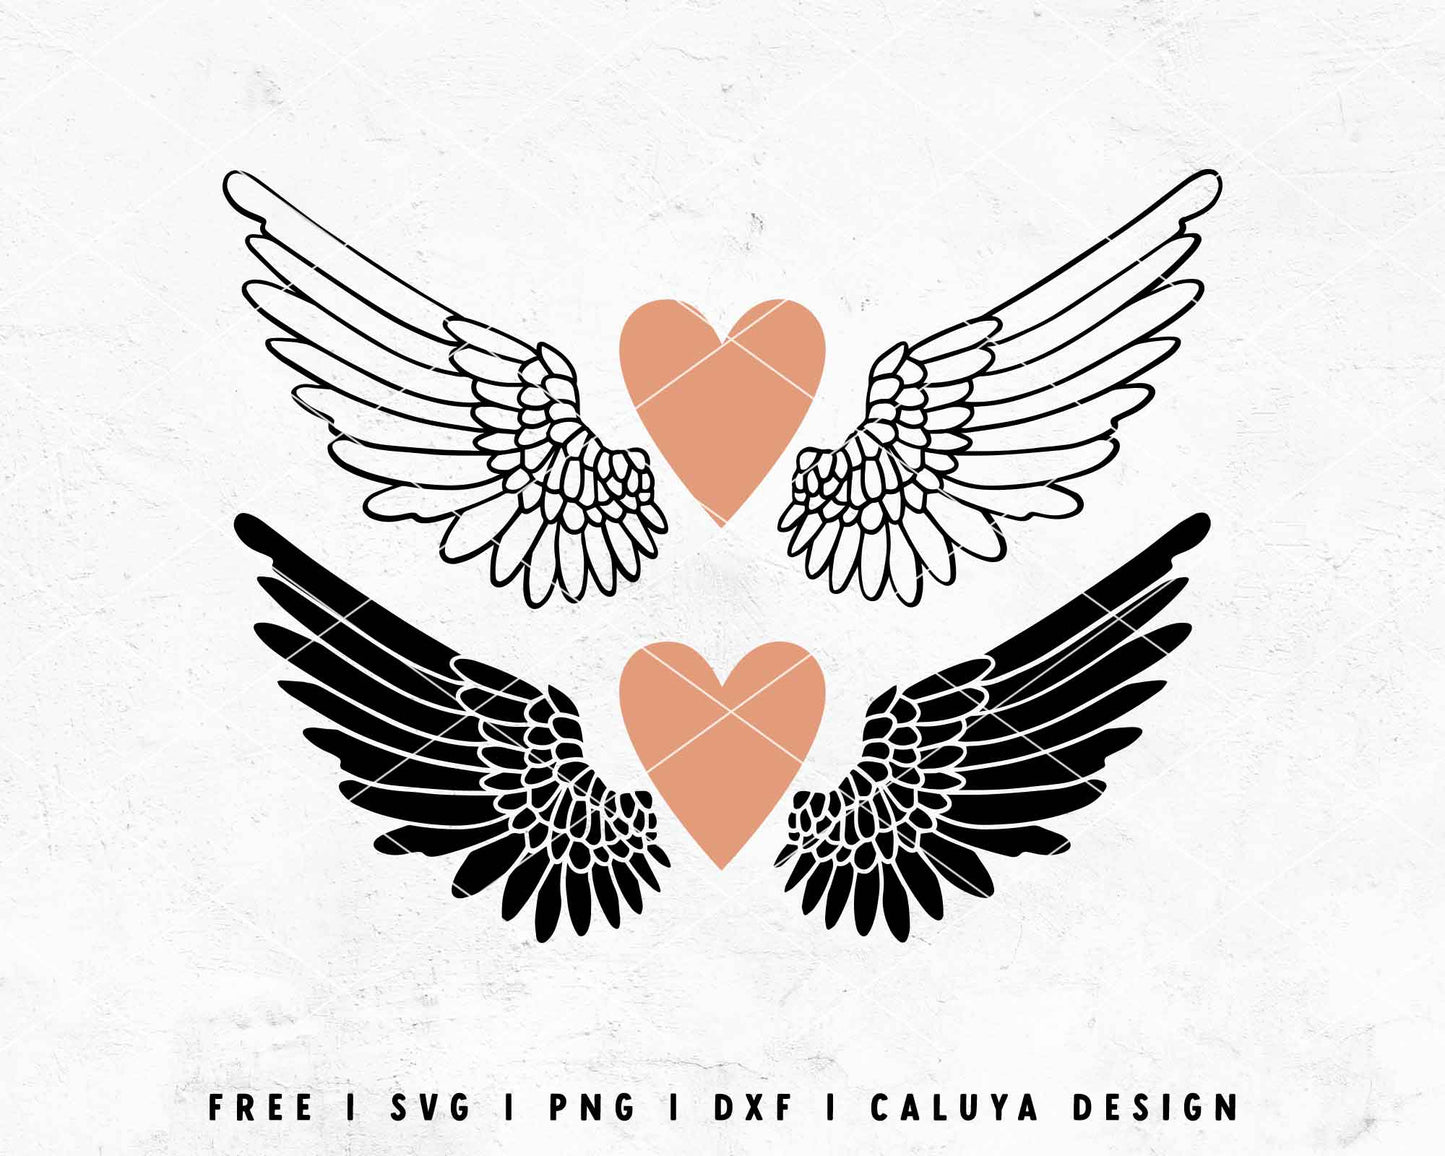 FREE Heart With Wings SVG | Grief SVG | Angel Wings SVG Cut File for Cricut, Cameo Silhouette | Free SVG Cut File